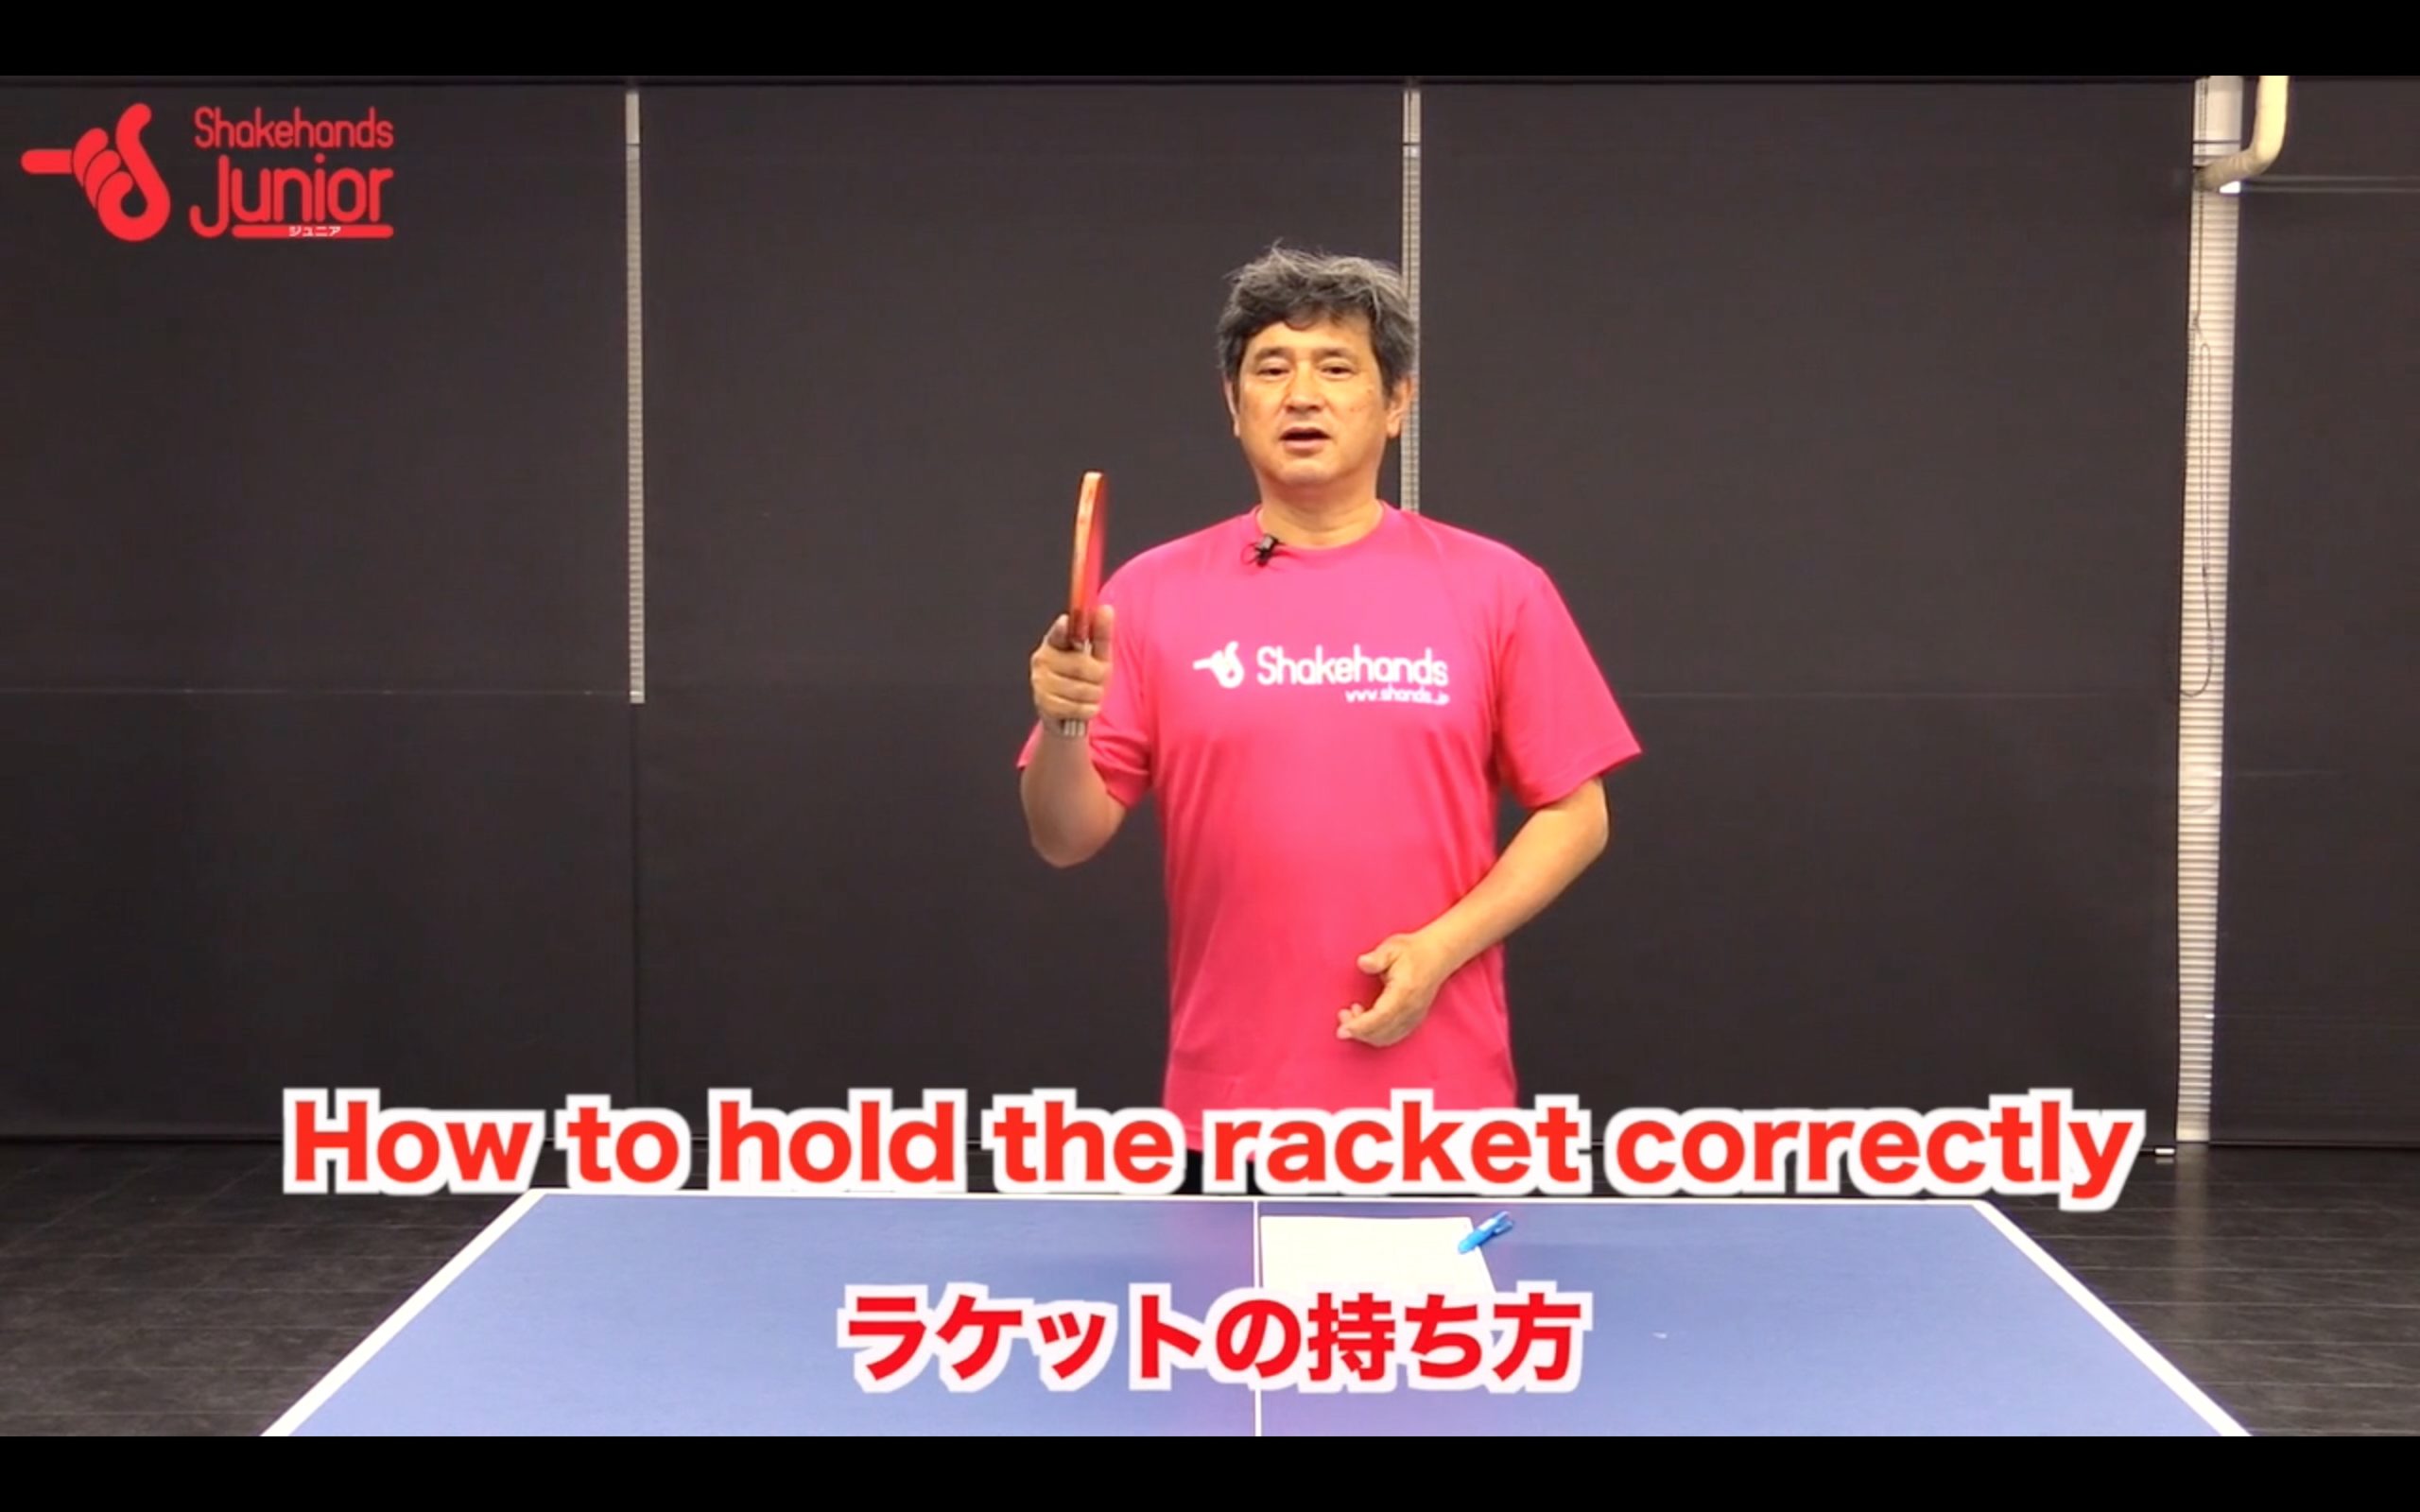 How to hold the racket correctly